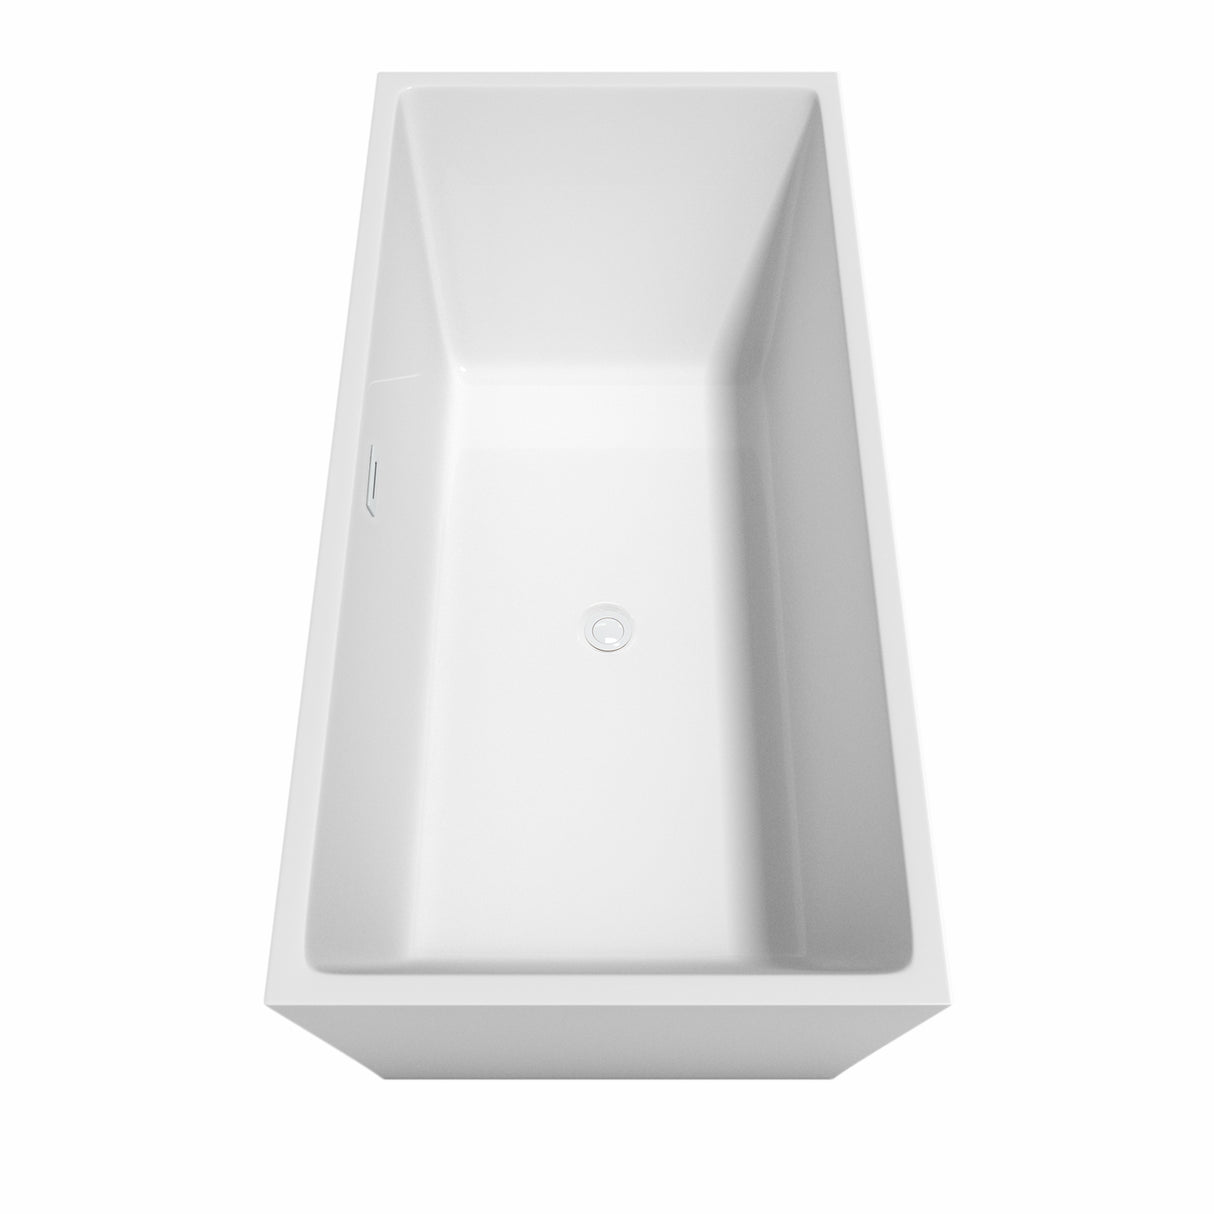 Sara 67 Inch Freestanding Bathtub in White with Shiny White Drain and Overflow Trim